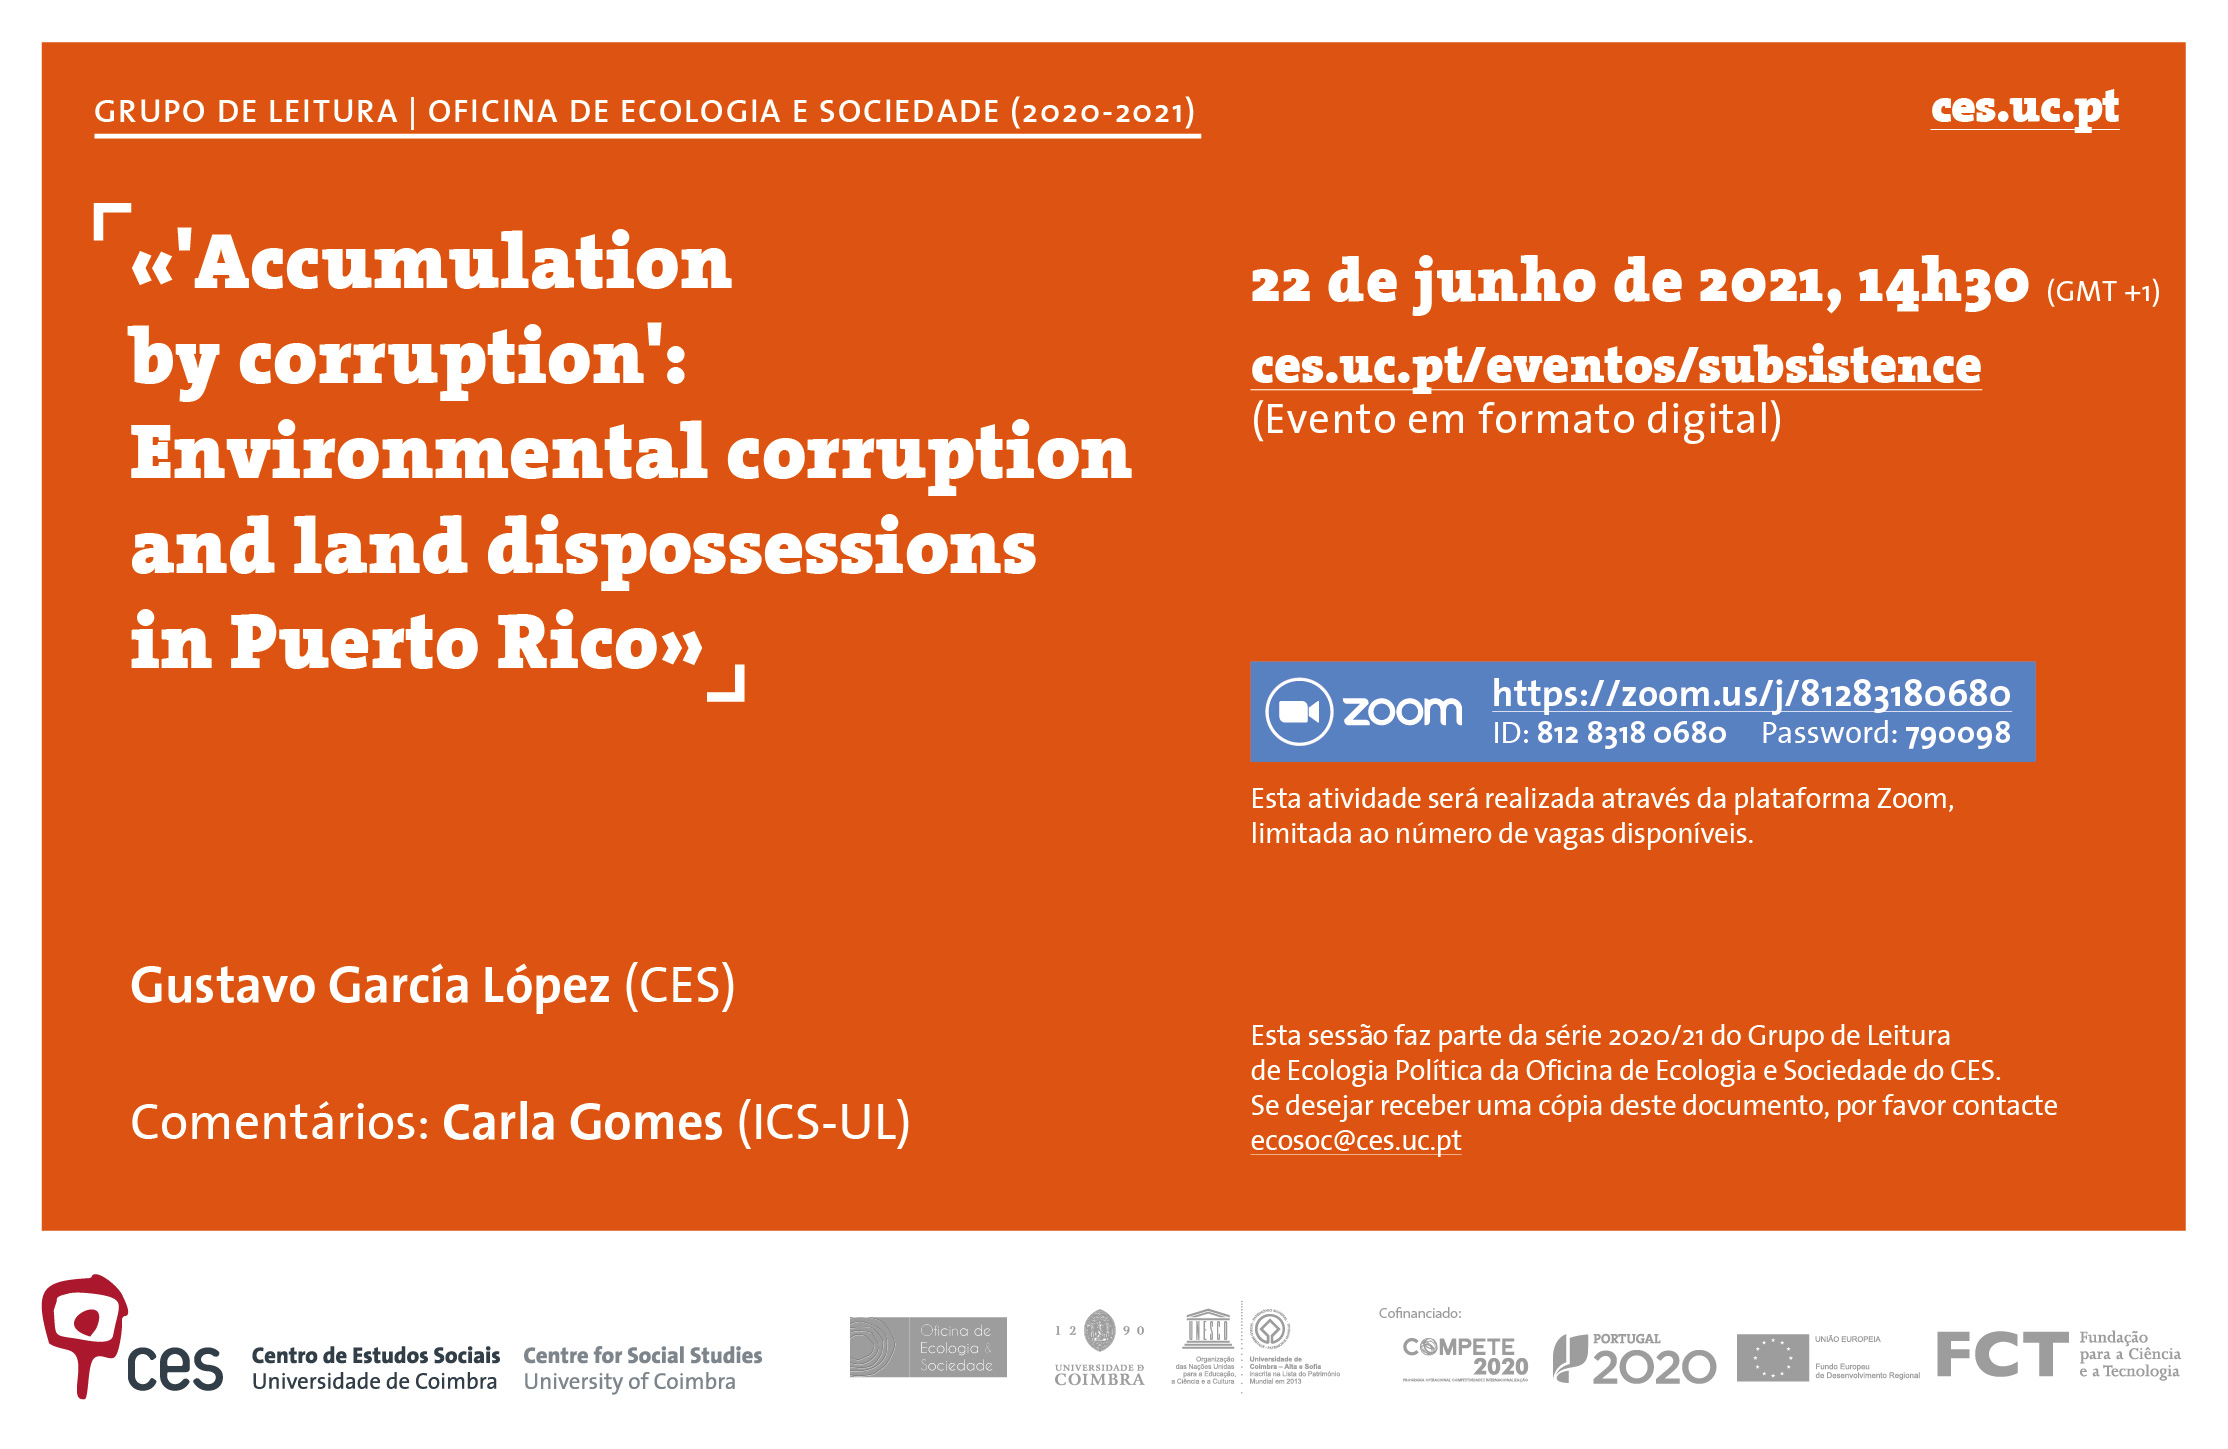 «'Accumulation by corruption': Environmental corruption and land dispossessions in Puerto Rico»<span id="edit_31785"><script>$(function() { $('#edit_31785').load( "/myces/user/editobj.php?tipo=evento&id=31785" ); });</script></span>